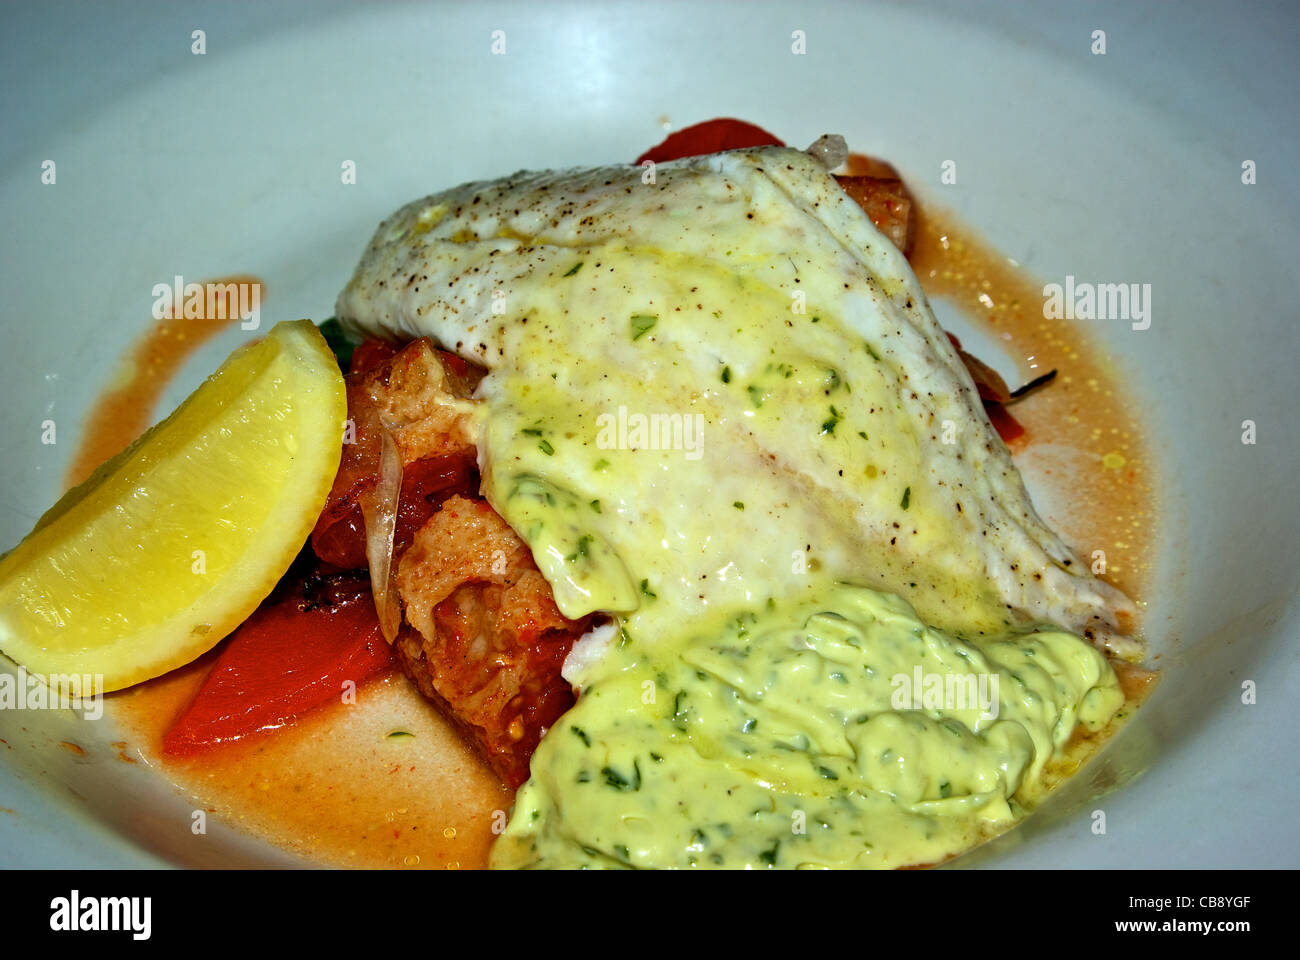 Baked snapper fish seafood dinner main course panzanella salad Stock Photo